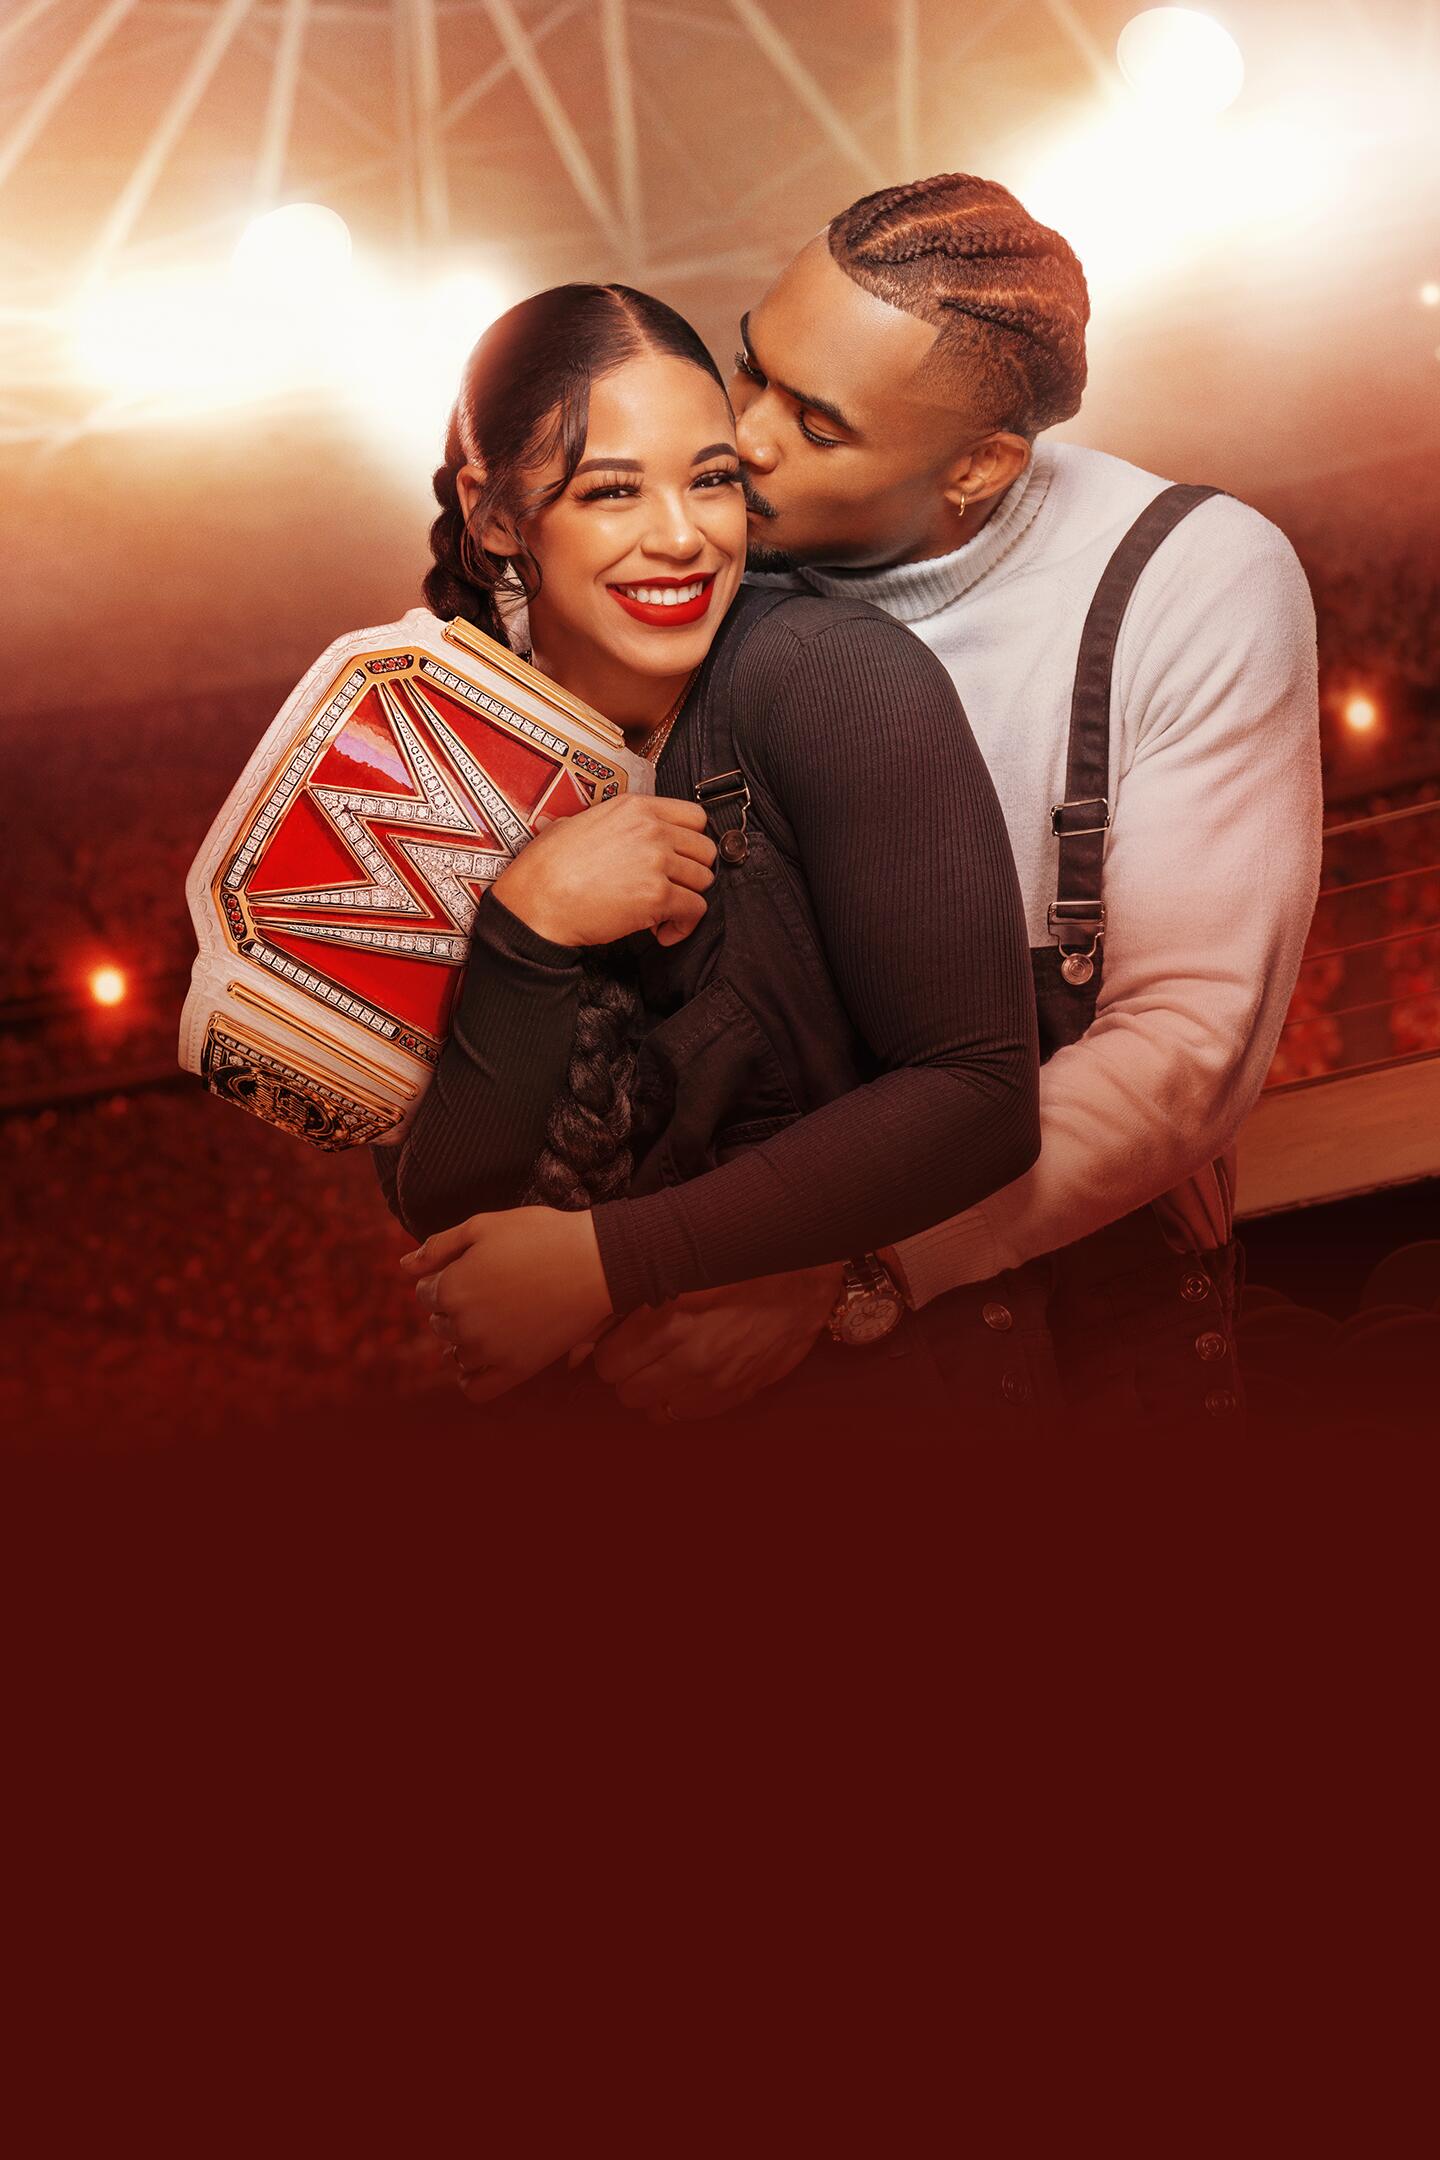 Love & WWE: Bianca & Montez -- Season 1 -- “Love & WWE: Bianca & Montez” is a fun, exciting peek into the personal lives of WWE’s hottest couple. Bianca Belair and Montez Ford’s road to WrestleMania is a wild ride, as Montez continues his ascent and Bianca fights to hold on to her title. With the support of their tight knit group of friends, family and fellow superstars, the dynamic duo somehow always manages to pull off the impossible.  Bianca Belair and Montez Ford, shown. (Courtesy of Hulu)